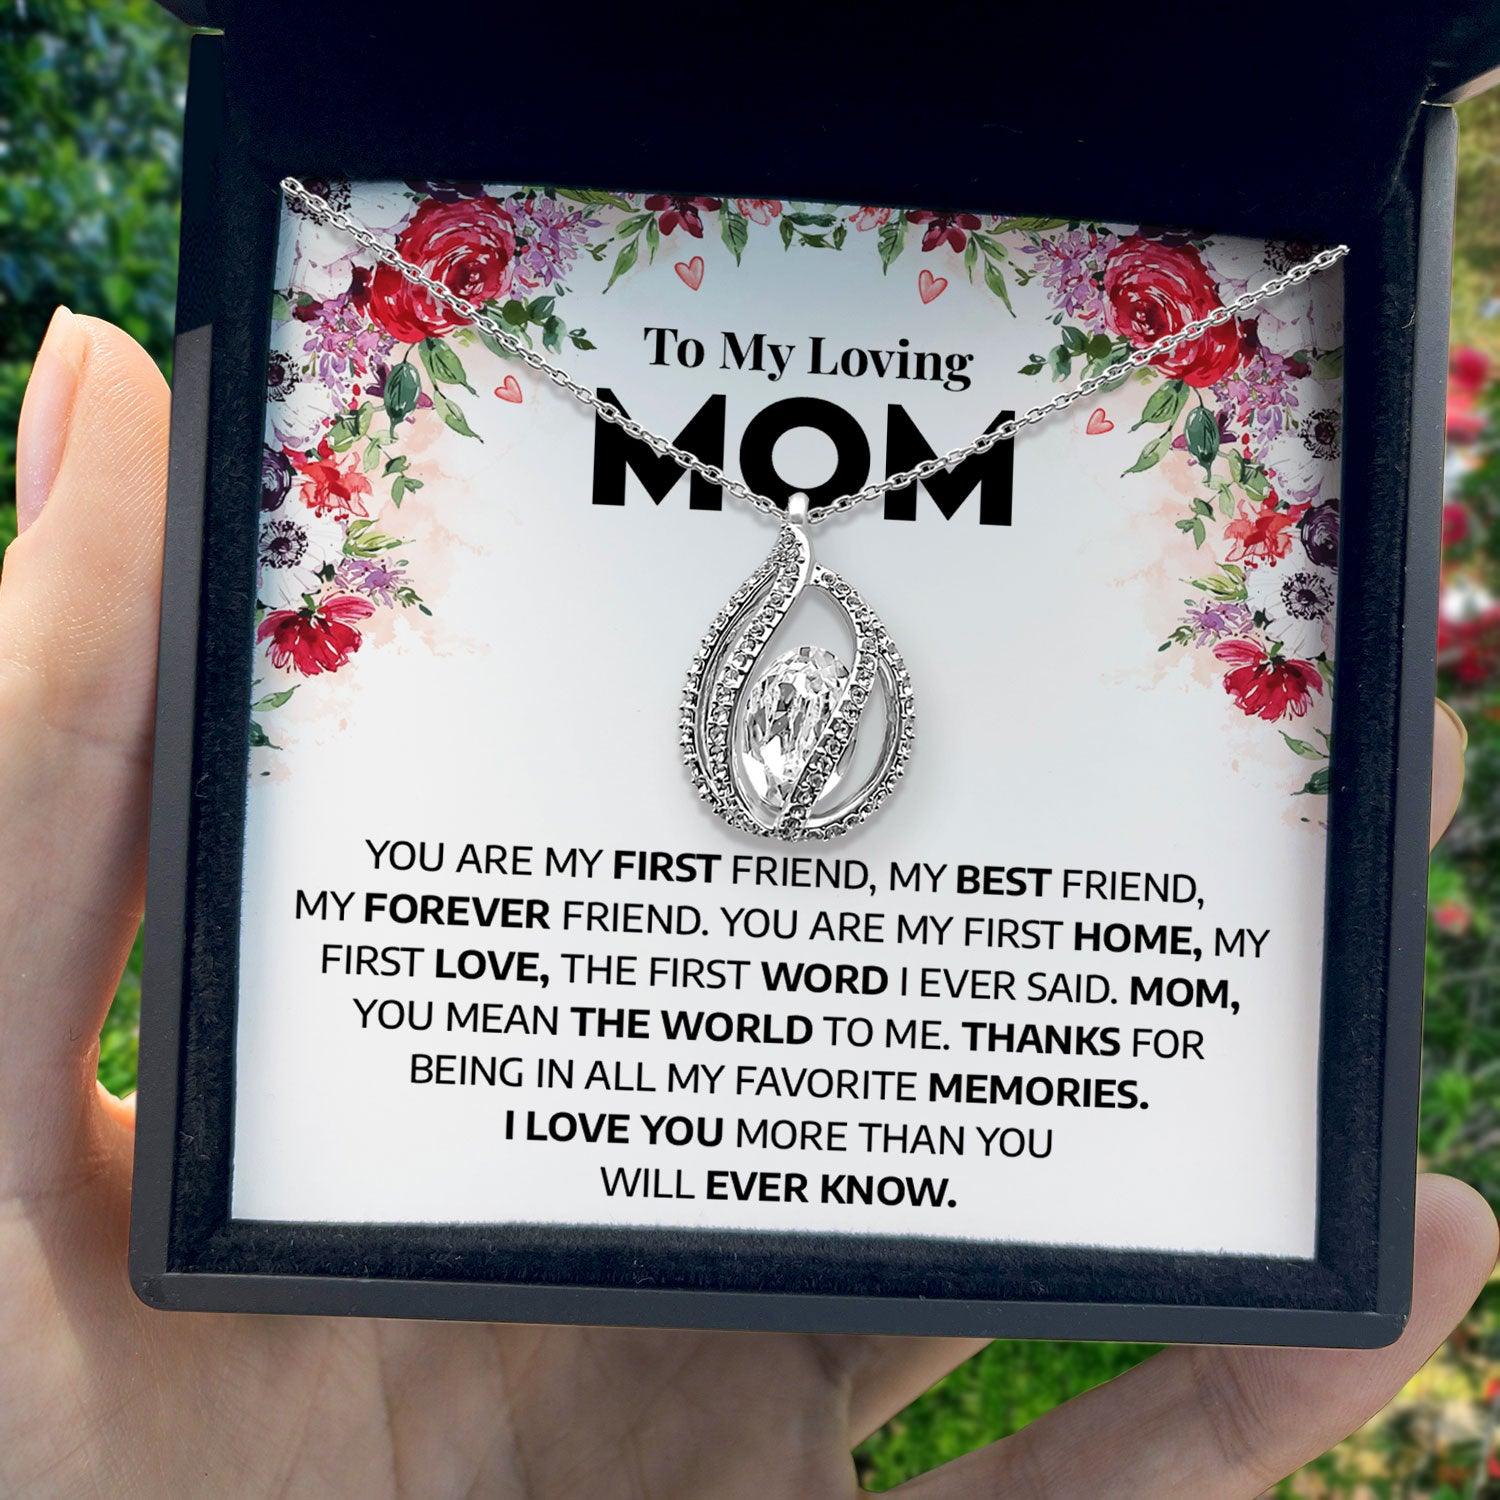 To My Loving Mom - You Are My First Friend, My Best Friend, My Forever Friend - Orbital Birdcage Necklace - TRYNDI